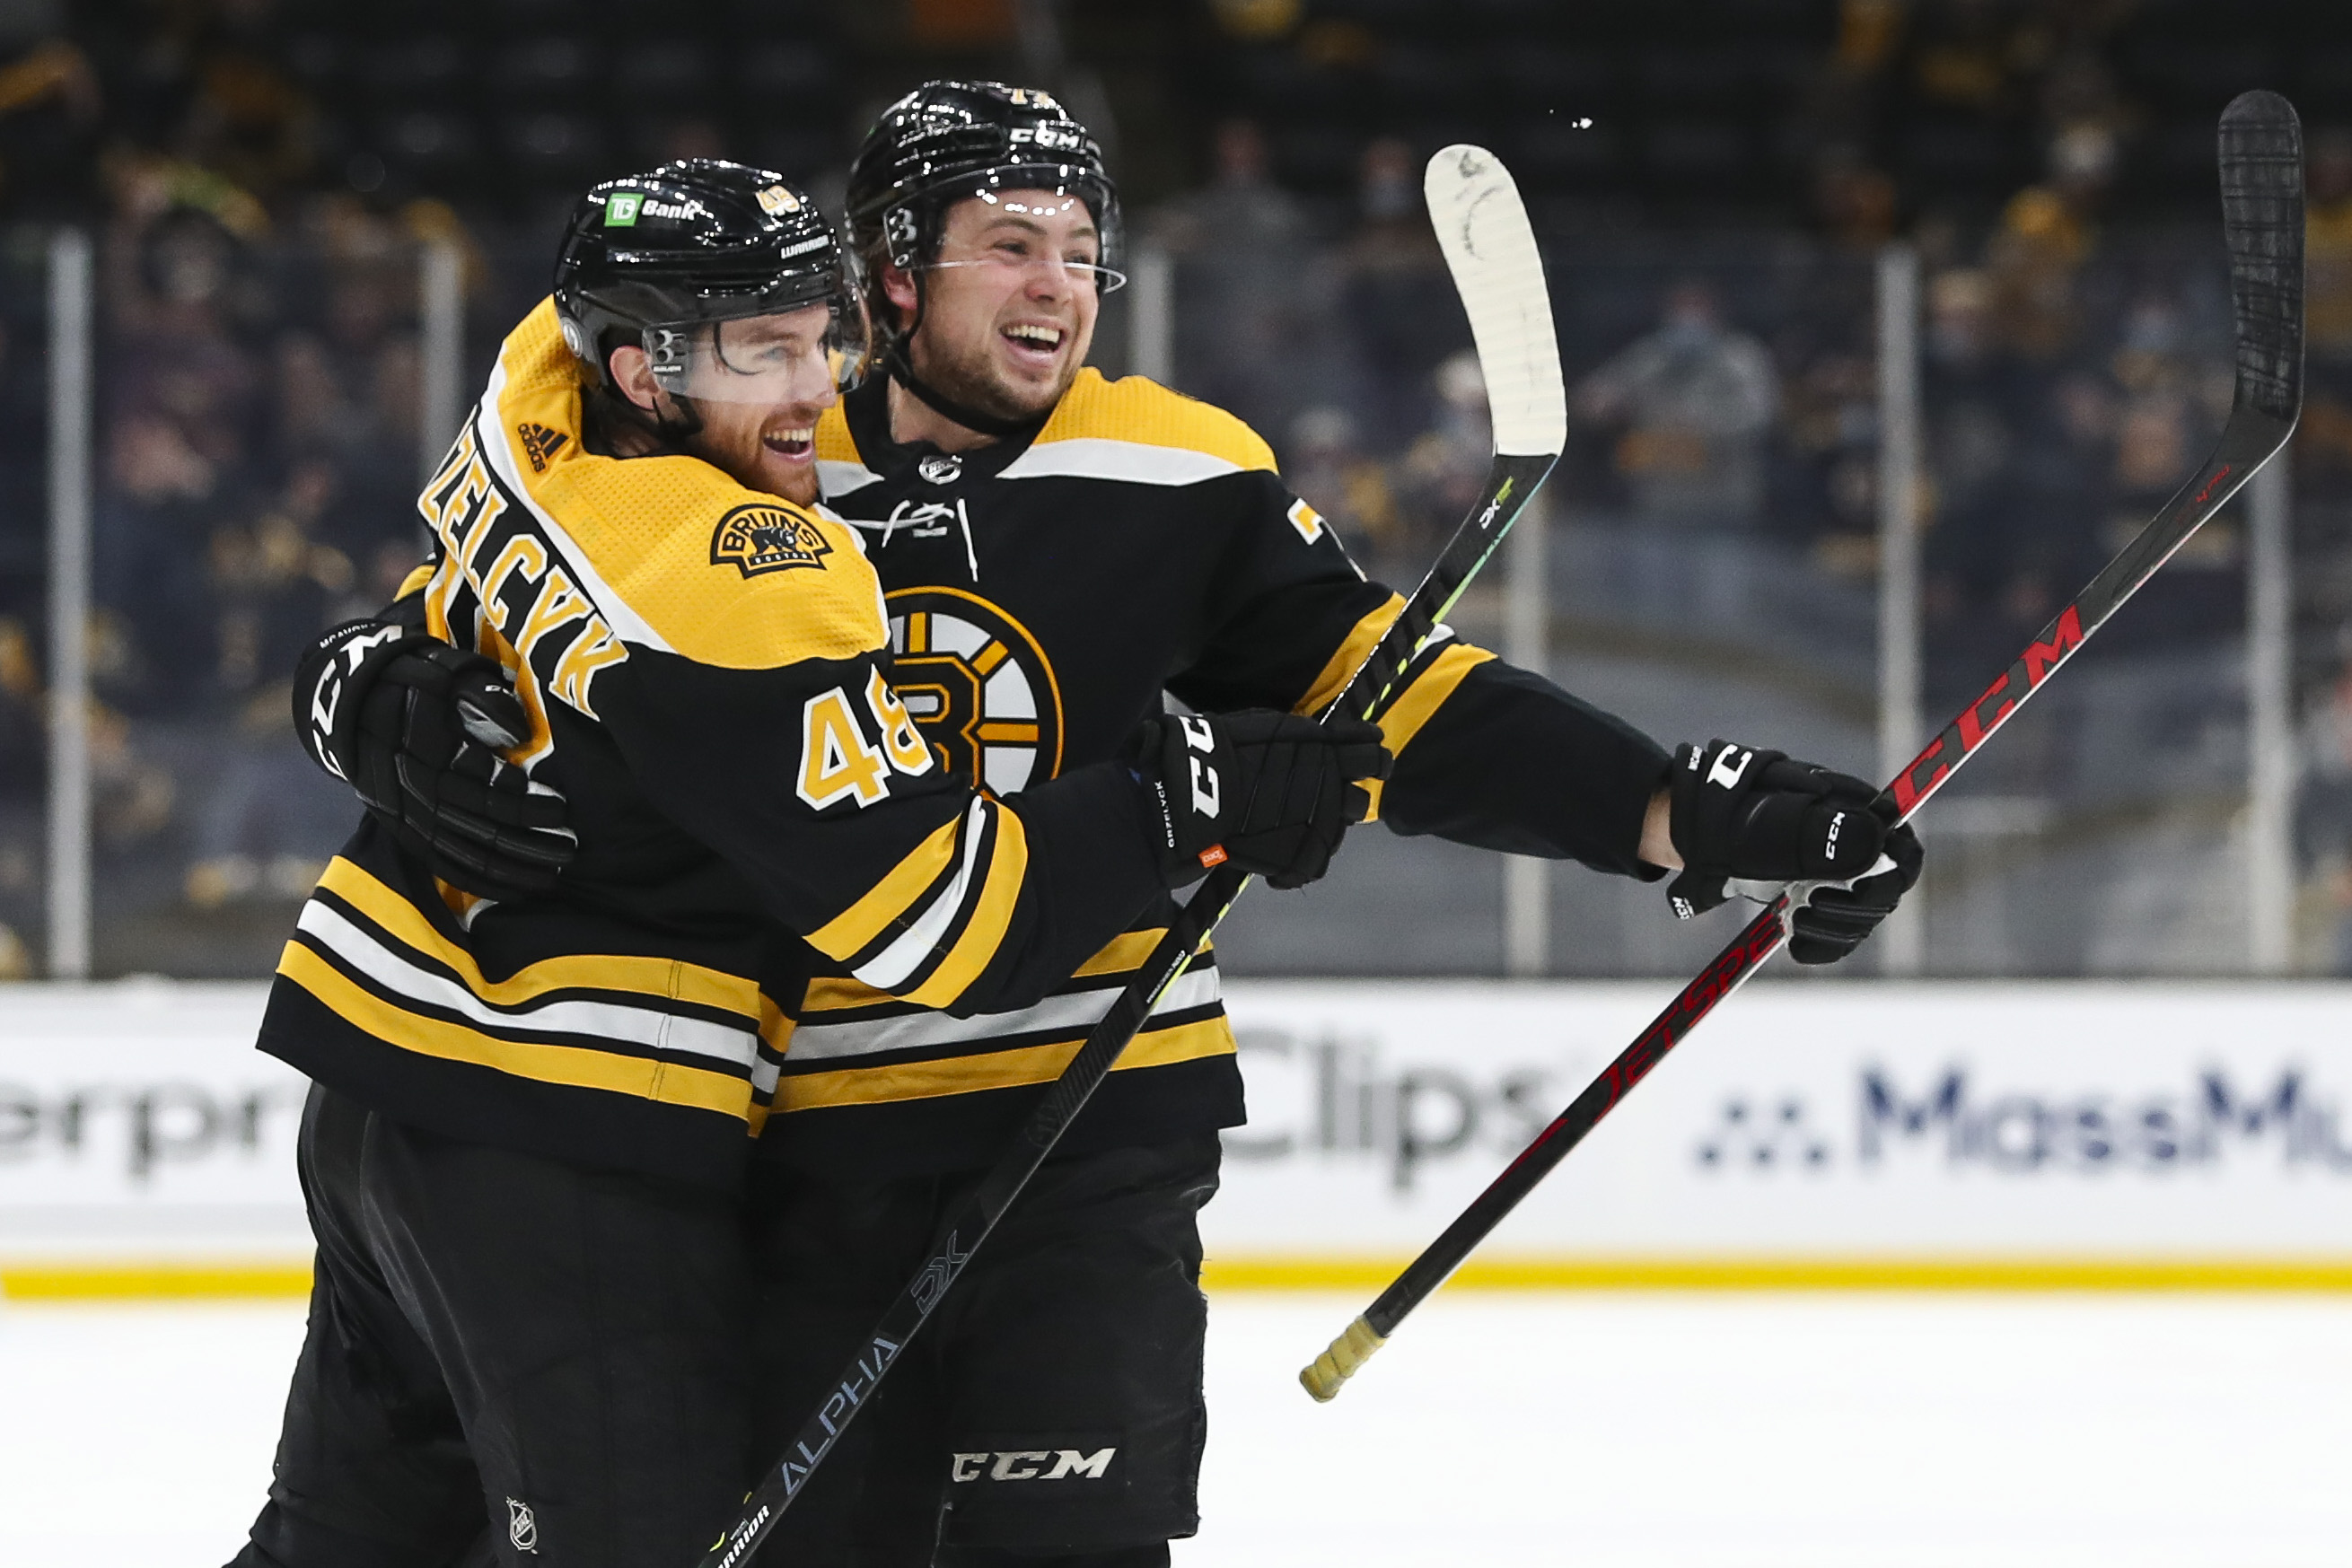 We're just plumbers': Bruins' Charlie McAvoy comes home to